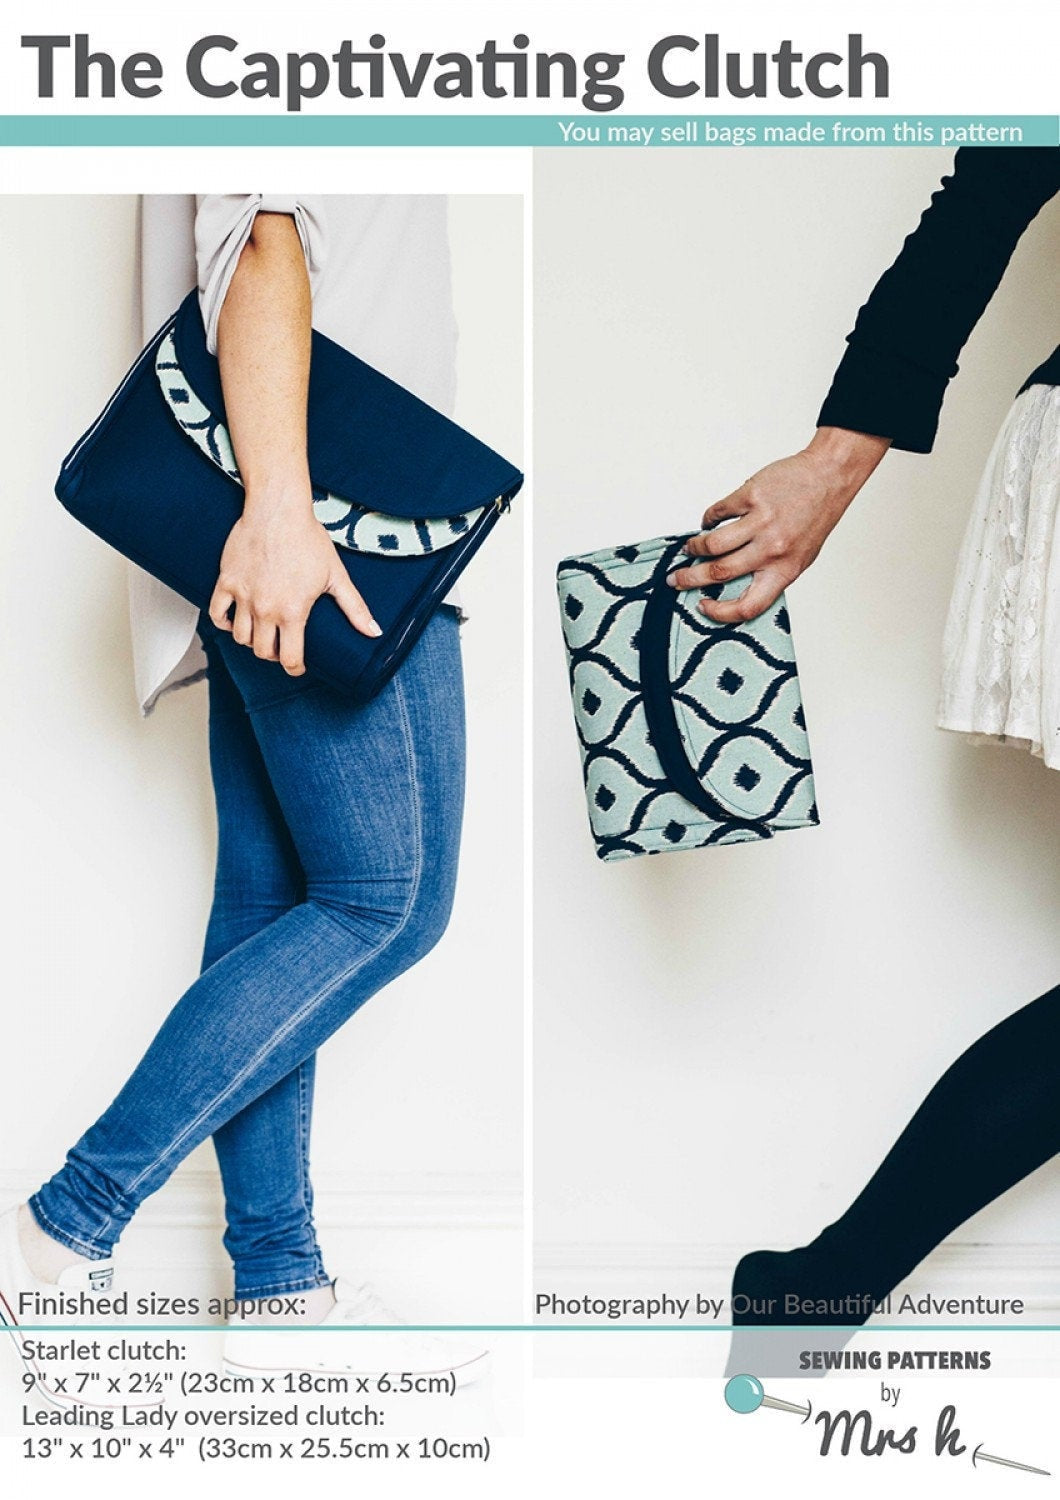 HAND BAG PATTERN - The Captivating Clutch